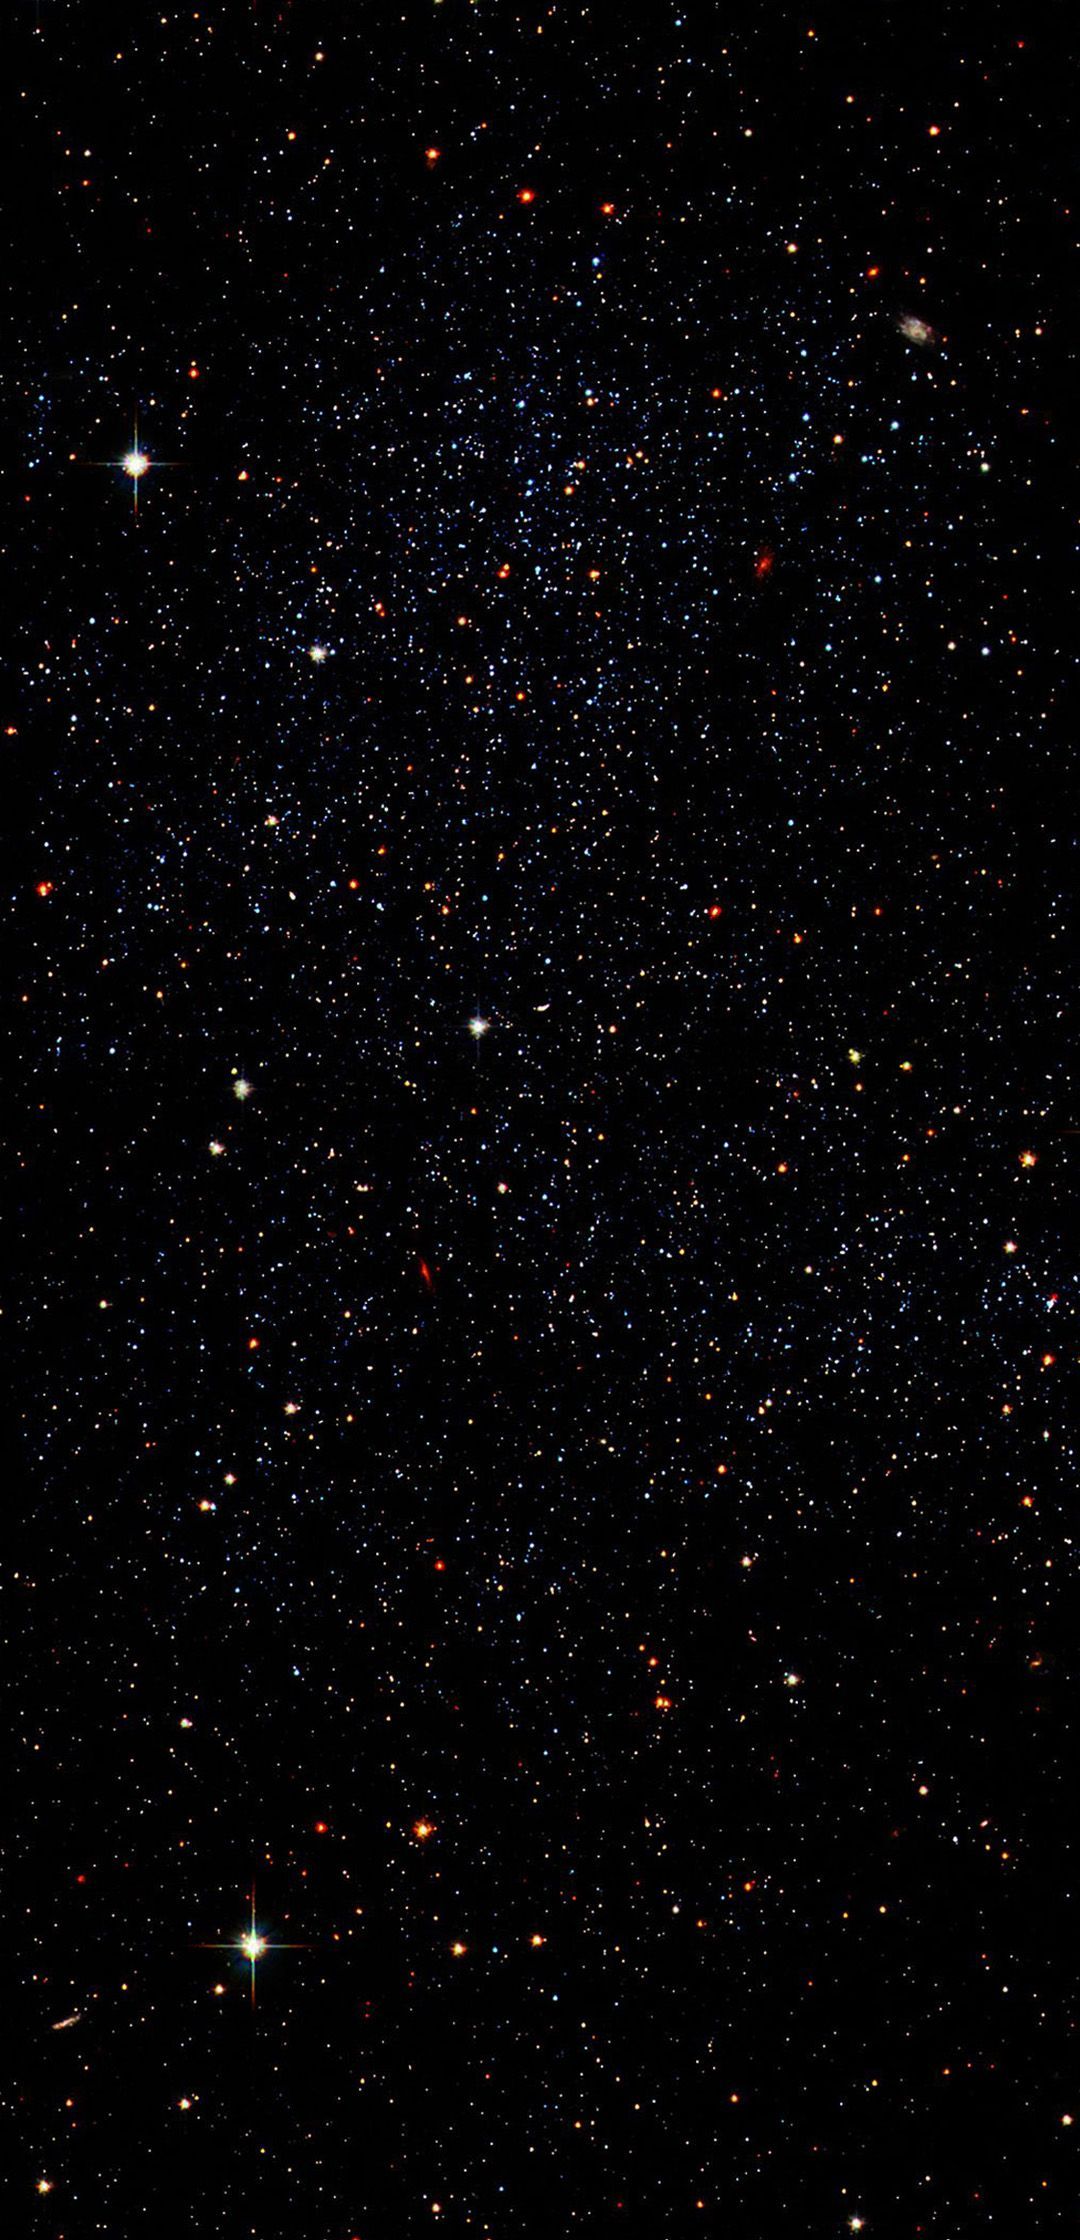 A black sky with stars and other objects - Constellation, stars